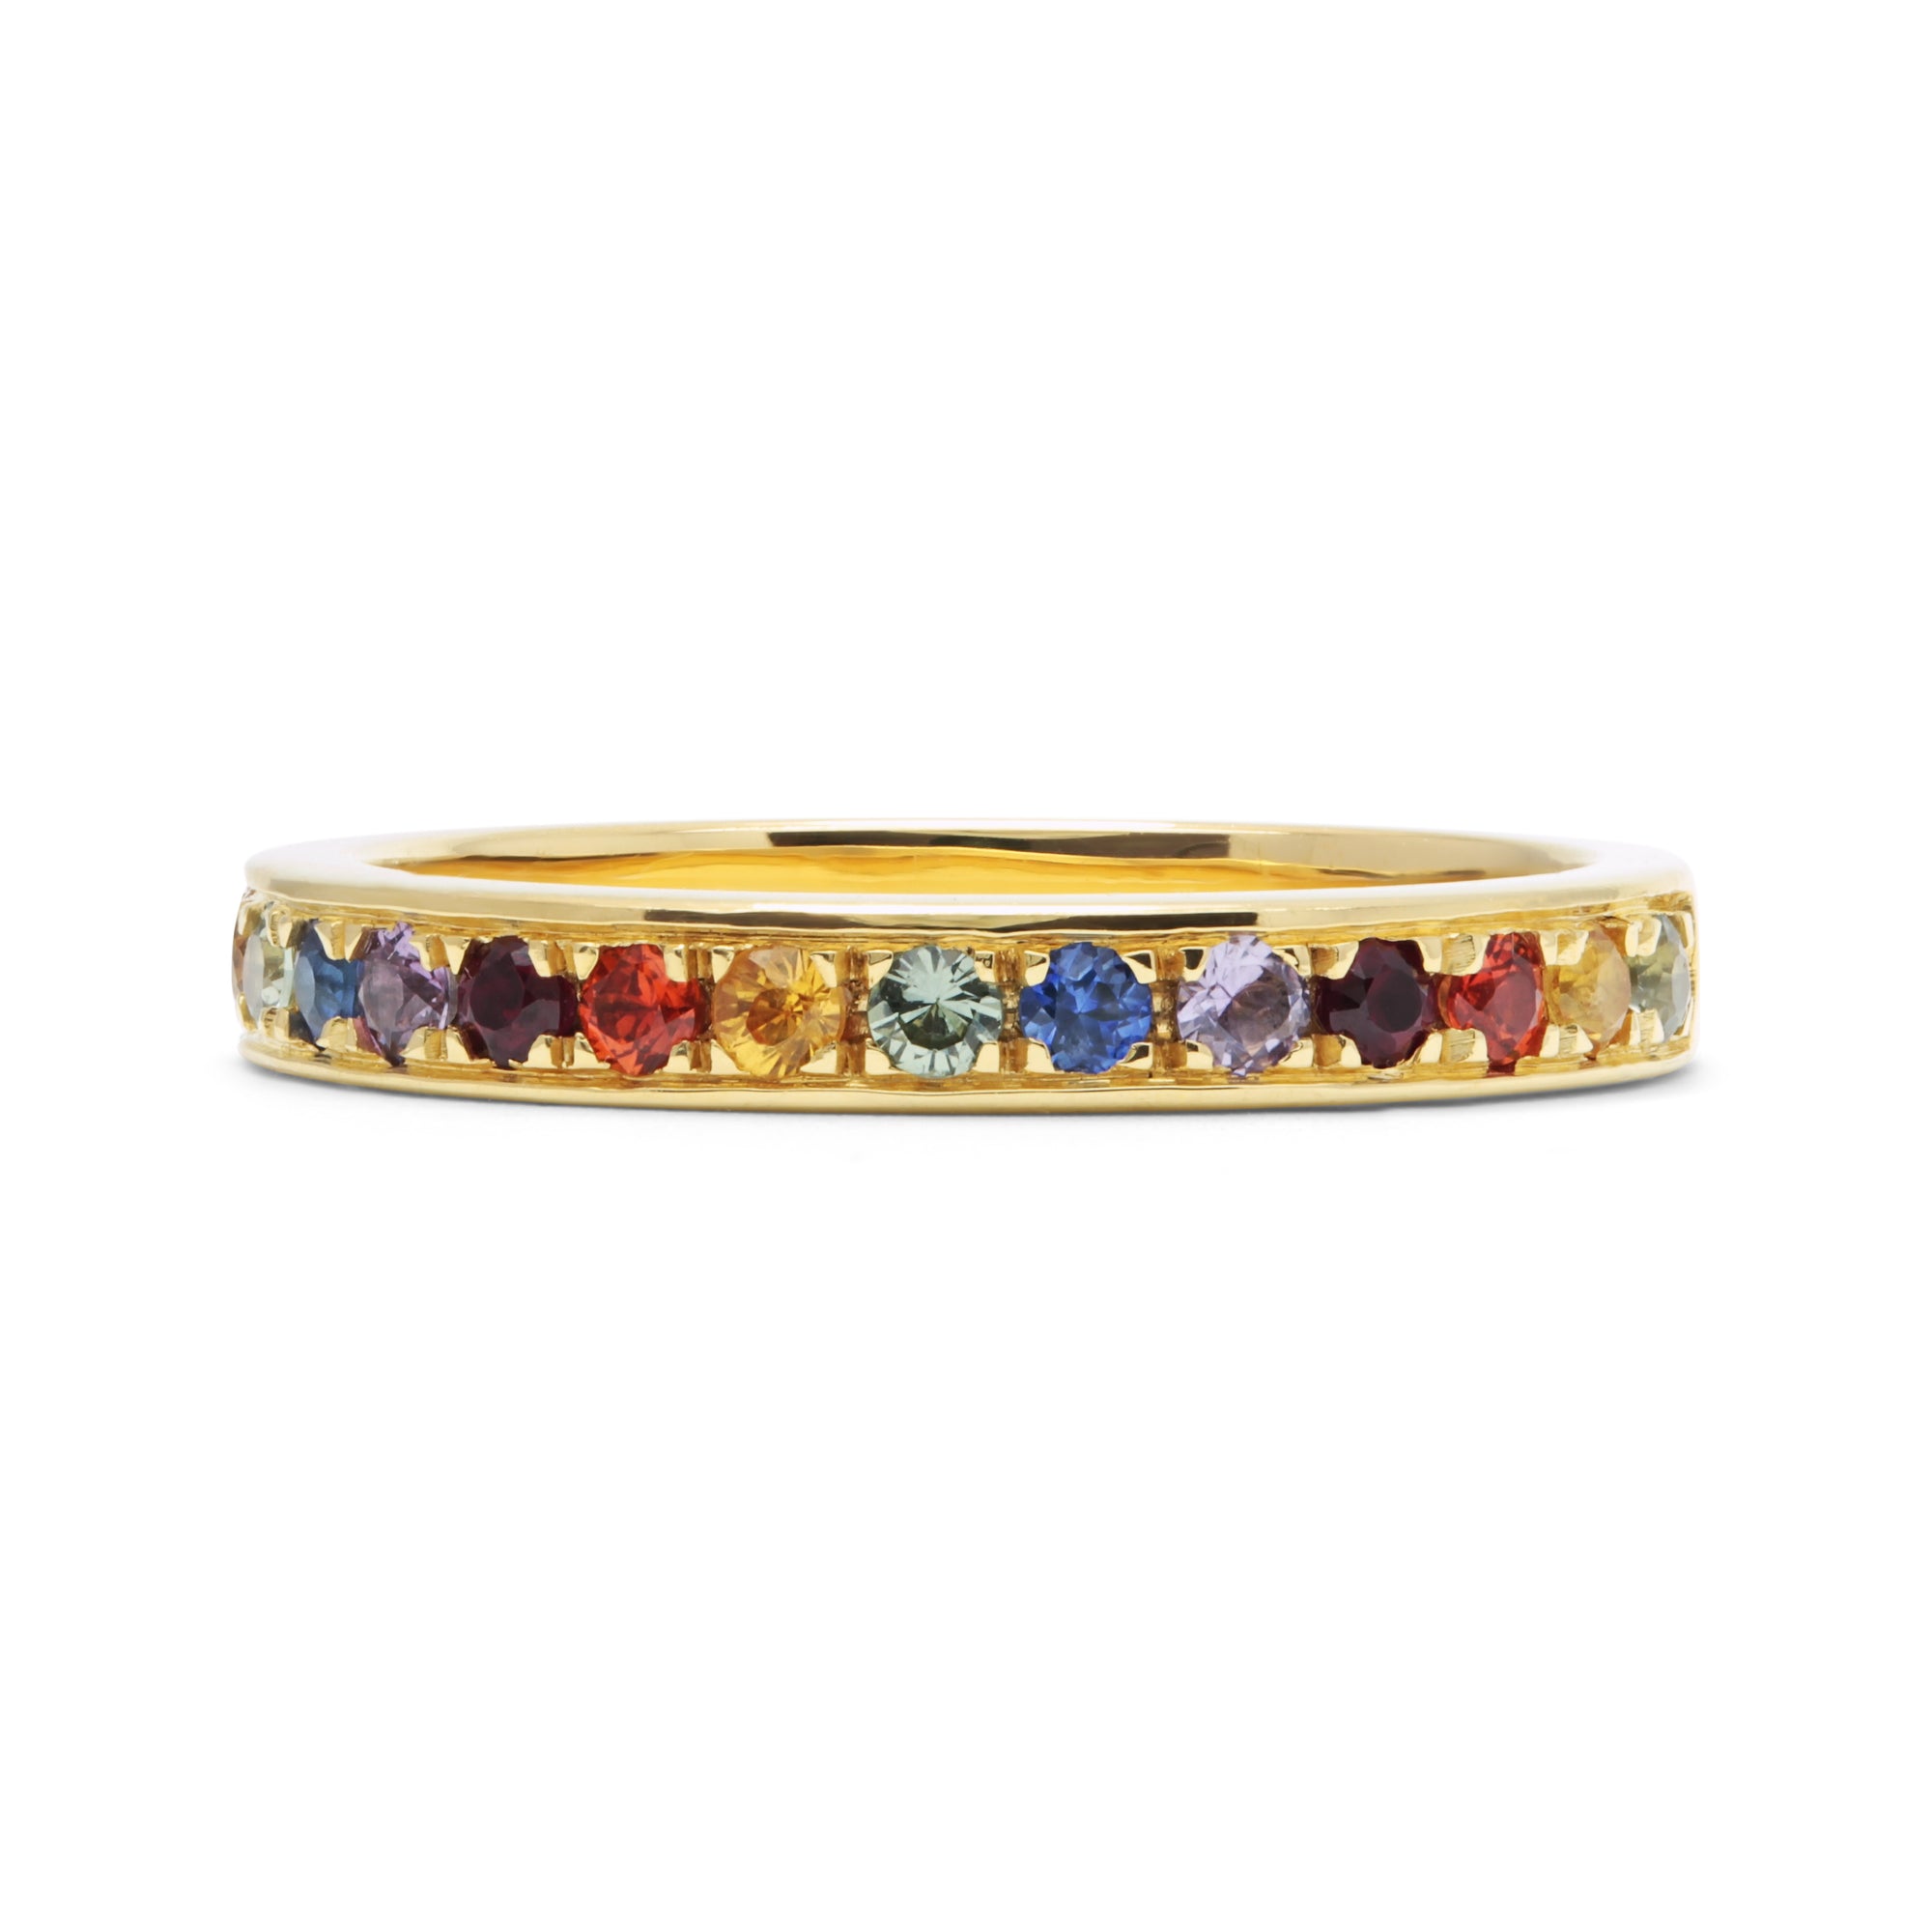 Freedom Ethical Gold Wedding Commitment Ring, 18ct recycled yellow gold and a rainbow of traceable, conflict-free Sri Lankan sapphires